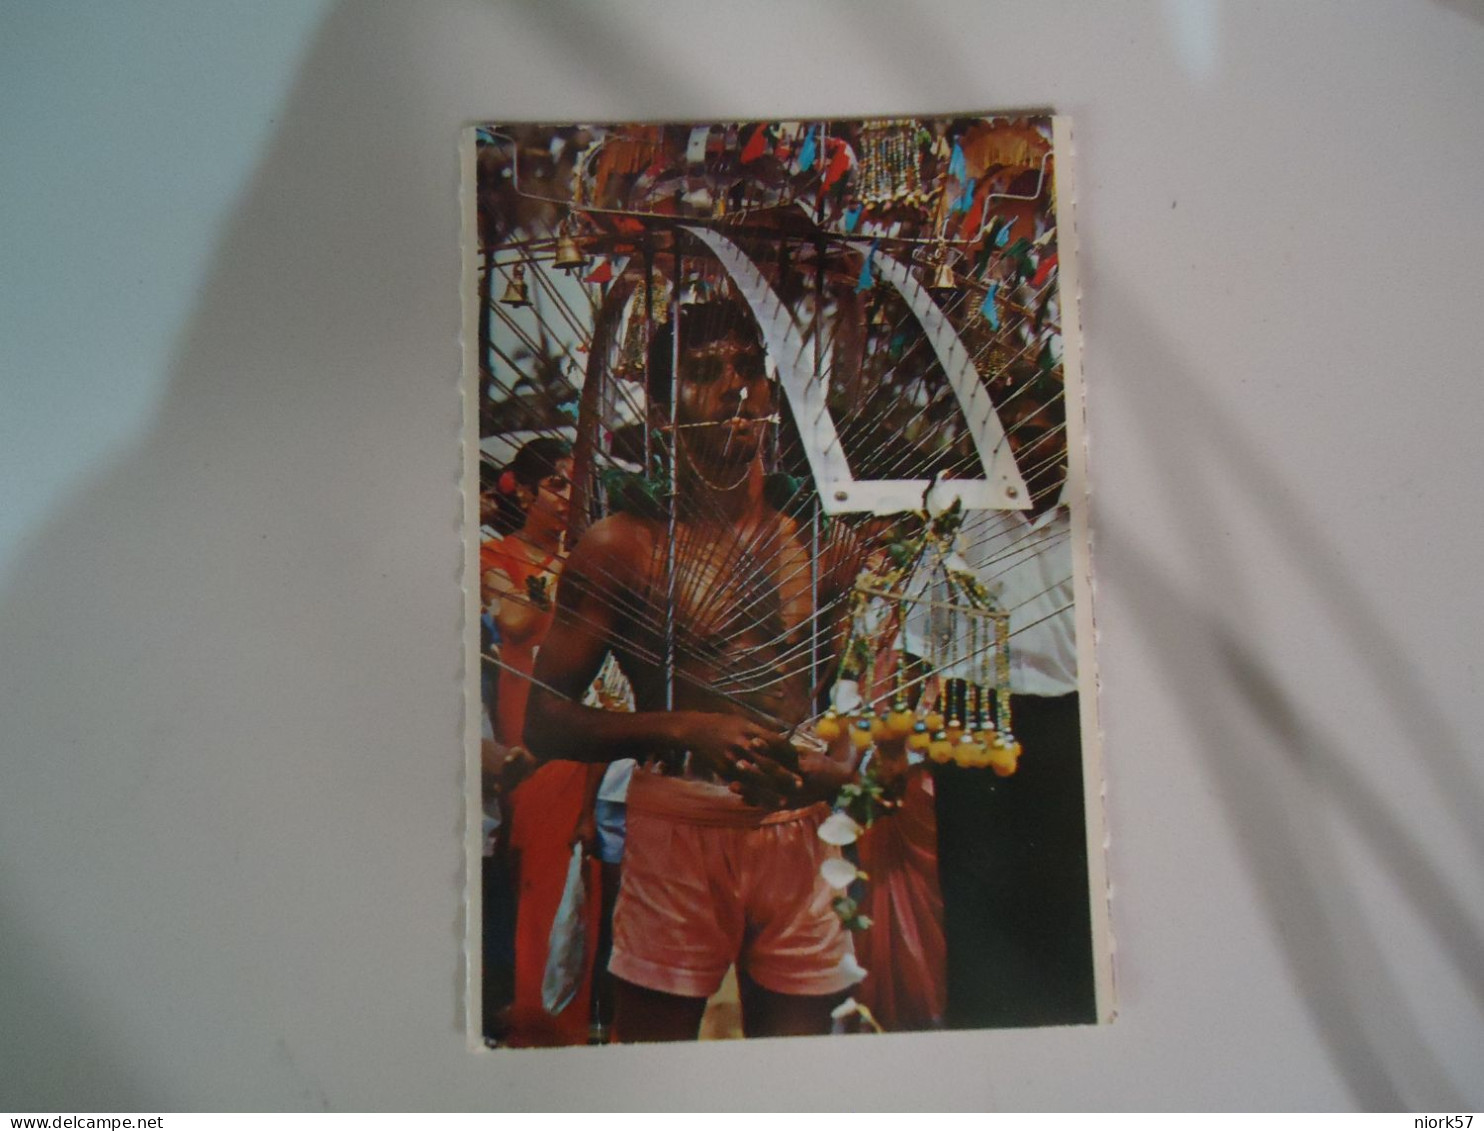 SINGAPORE POSTCARDS   SMALL KEVADA CARRYING HINDU DEVETES     FOR MORE PURCHASES 10% DISCOUNT - Singapore